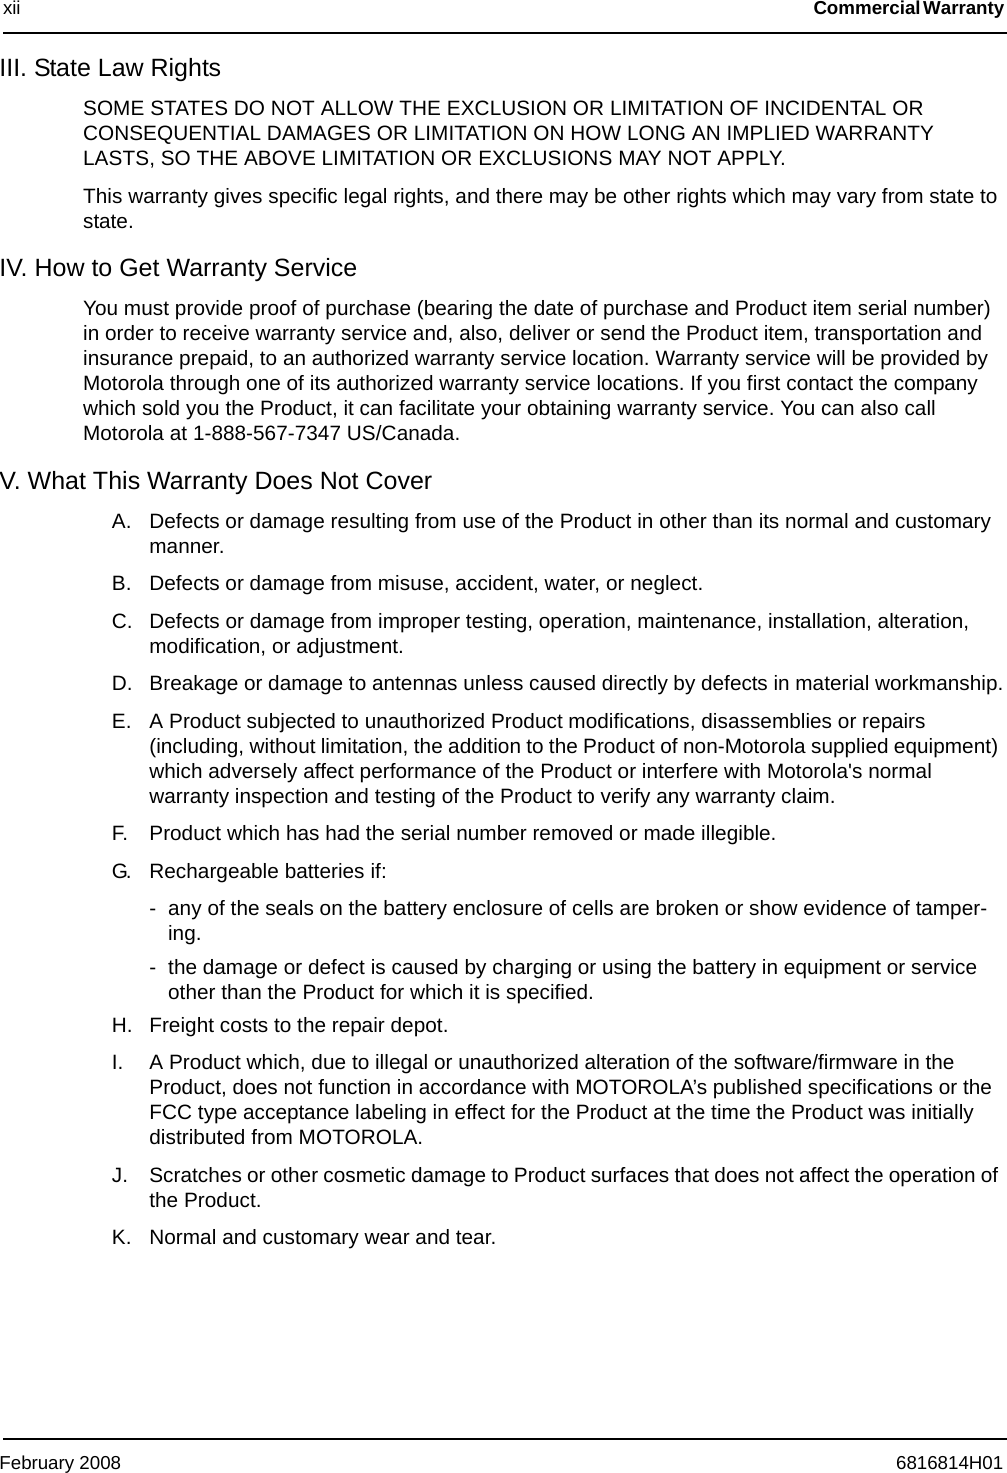 February 2008 6816814H01xii Commercial Warranty III. State Law Rights SOME STATES DO NOT ALLOW THE EXCLUSION OR LIMITATION OF INCIDENTAL OR CONSEQUENTIAL DAMAGES OR LIMITATION ON HOW LONG AN IMPLIED WARRANTY LASTS, SO THE ABOVE LIMITATION OR EXCLUSIONS MAY NOT APPLY.This warranty gives specific legal rights, and there may be other rights which may vary from state to state.IV. How to Get Warranty ServiceYou must provide proof of purchase (bearing the date of purchase and Product item serial number) in order to receive warranty service and, also, deliver or send the Product item, transportation and insurance prepaid, to an authorized warranty service location. Warranty service will be provided by Motorola through one of its authorized warranty service locations. If you first contact the company which sold you the Product, it can facilitate your obtaining warranty service. You can also call Motorola at 1-888-567-7347 US/Canada.V. What This Warranty Does Not CoverA. Defects or damage resulting from use of the Product in other than its normal and customary manner.B. Defects or damage from misuse, accident, water, or neglect.C. Defects or damage from improper testing, operation, maintenance, installation, alteration, modification, or adjustment.D. Breakage or damage to antennas unless caused directly by defects in material workmanship.E. A Product subjected to unauthorized Product modifications, disassemblies or repairs (including, without limitation, the addition to the Product of non-Motorola supplied equipment) which adversely affect performance of the Product or interfere with Motorola&apos;s normal warranty inspection and testing of the Product to verify any warranty claim.F. Product which has had the serial number removed or made illegible.G. Rechargeable batteries if:- any of the seals on the battery enclosure of cells are broken or show evidence of tamper-ing.- the damage or defect is caused by charging or using the battery in equipment or service other than the Product for which it is specified.H. Freight costs to the repair depot.I. A Product which, due to illegal or unauthorized alteration of the software/firmware in the Product, does not function in accordance with MOTOROLA’s published specifications or the FCC type acceptance labeling in effect for the Product at the time the Product was initially distributed from MOTOROLA.J. Scratches or other cosmetic damage to Product surfaces that does not affect the operation of the Product.K. Normal and customary wear and tear.